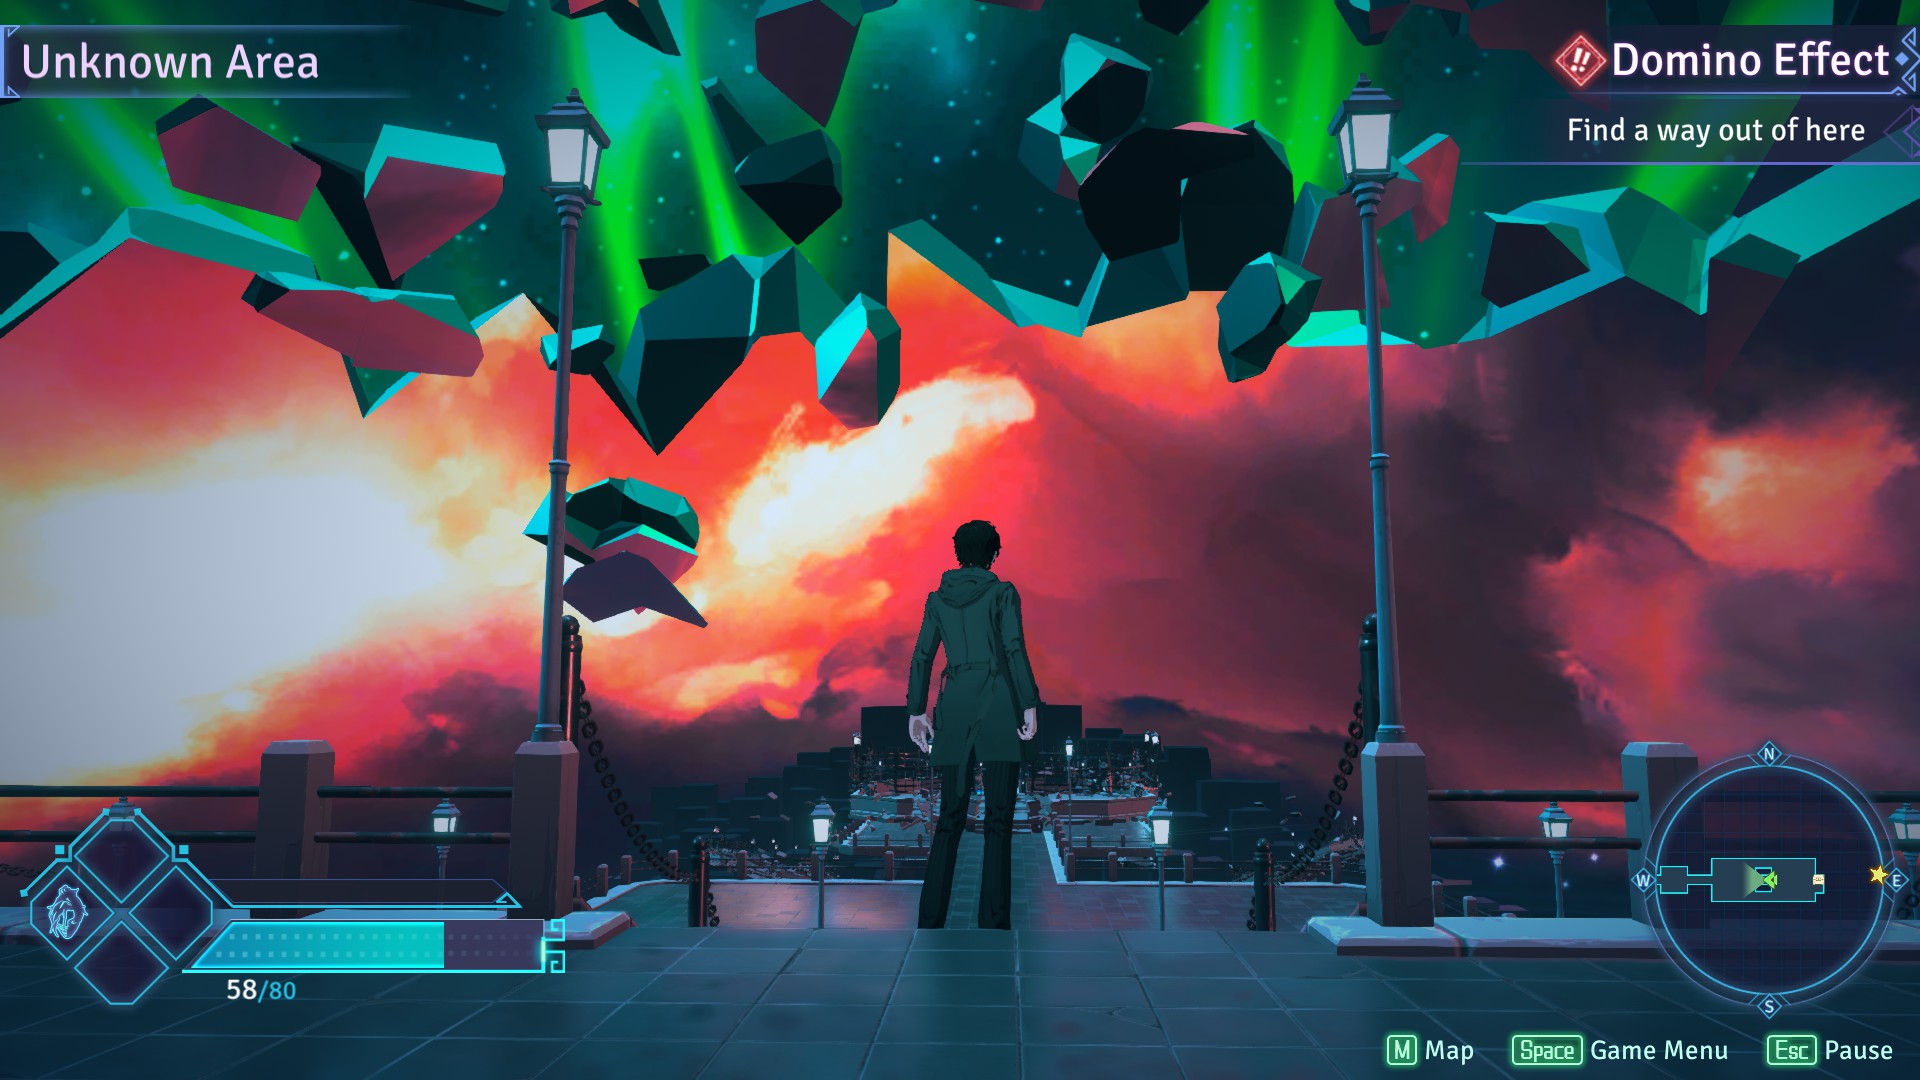 A man stands between two lamp posts as a crack revealing red clouds lies ahead, a mini map can be seen in the lower right corner and the objective in the top right.